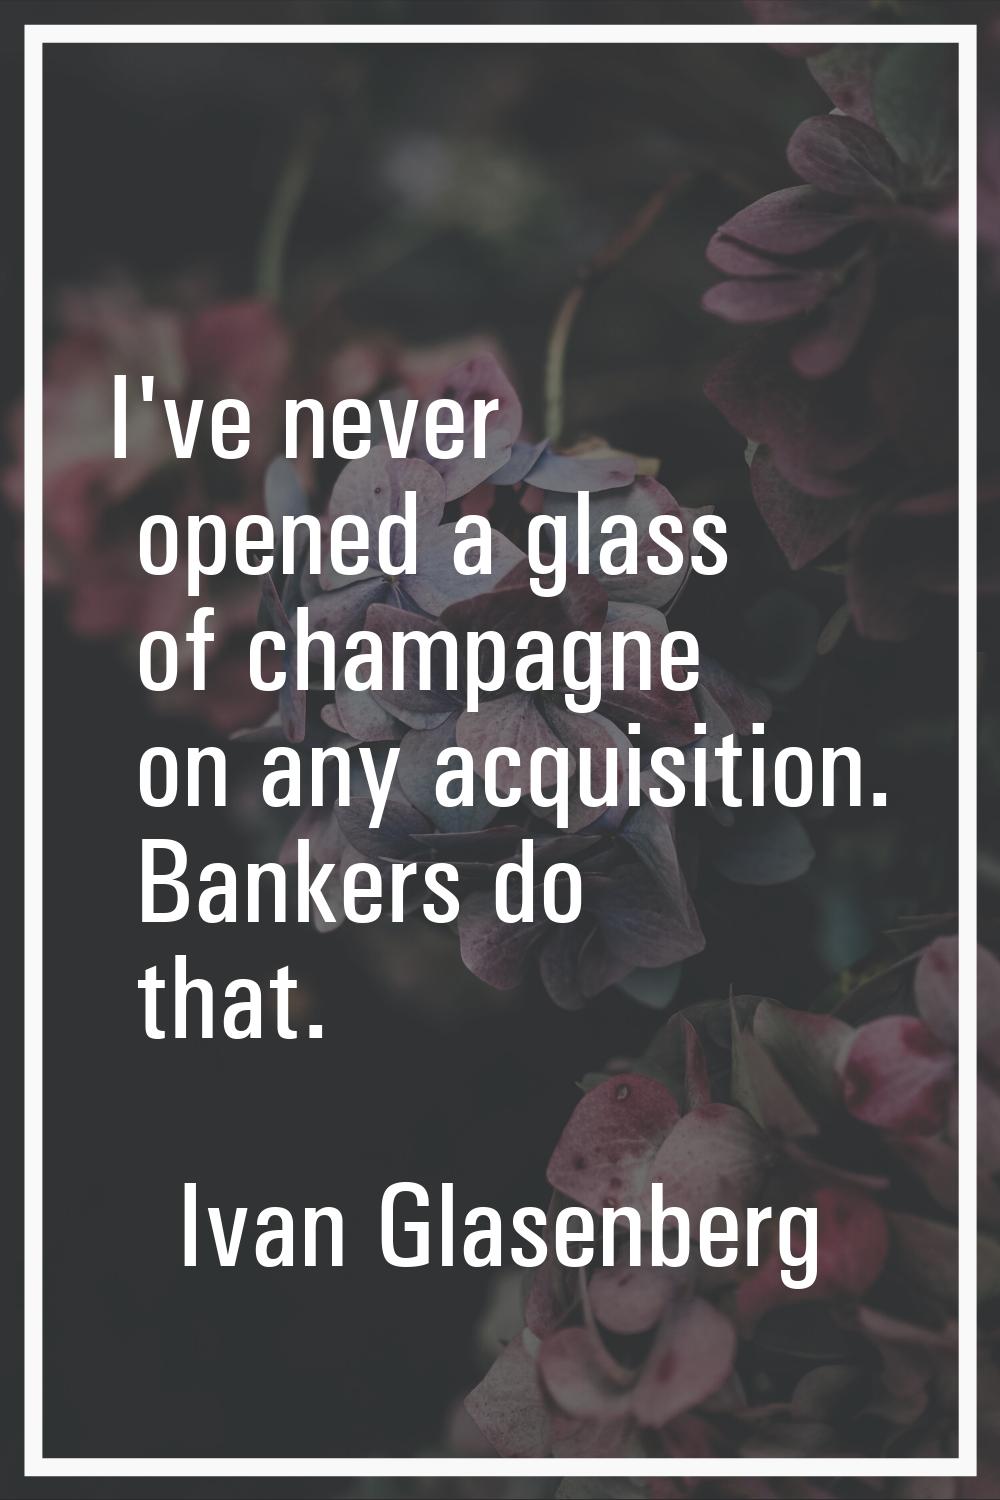 I've never opened a glass of champagne on any acquisition. Bankers do that.